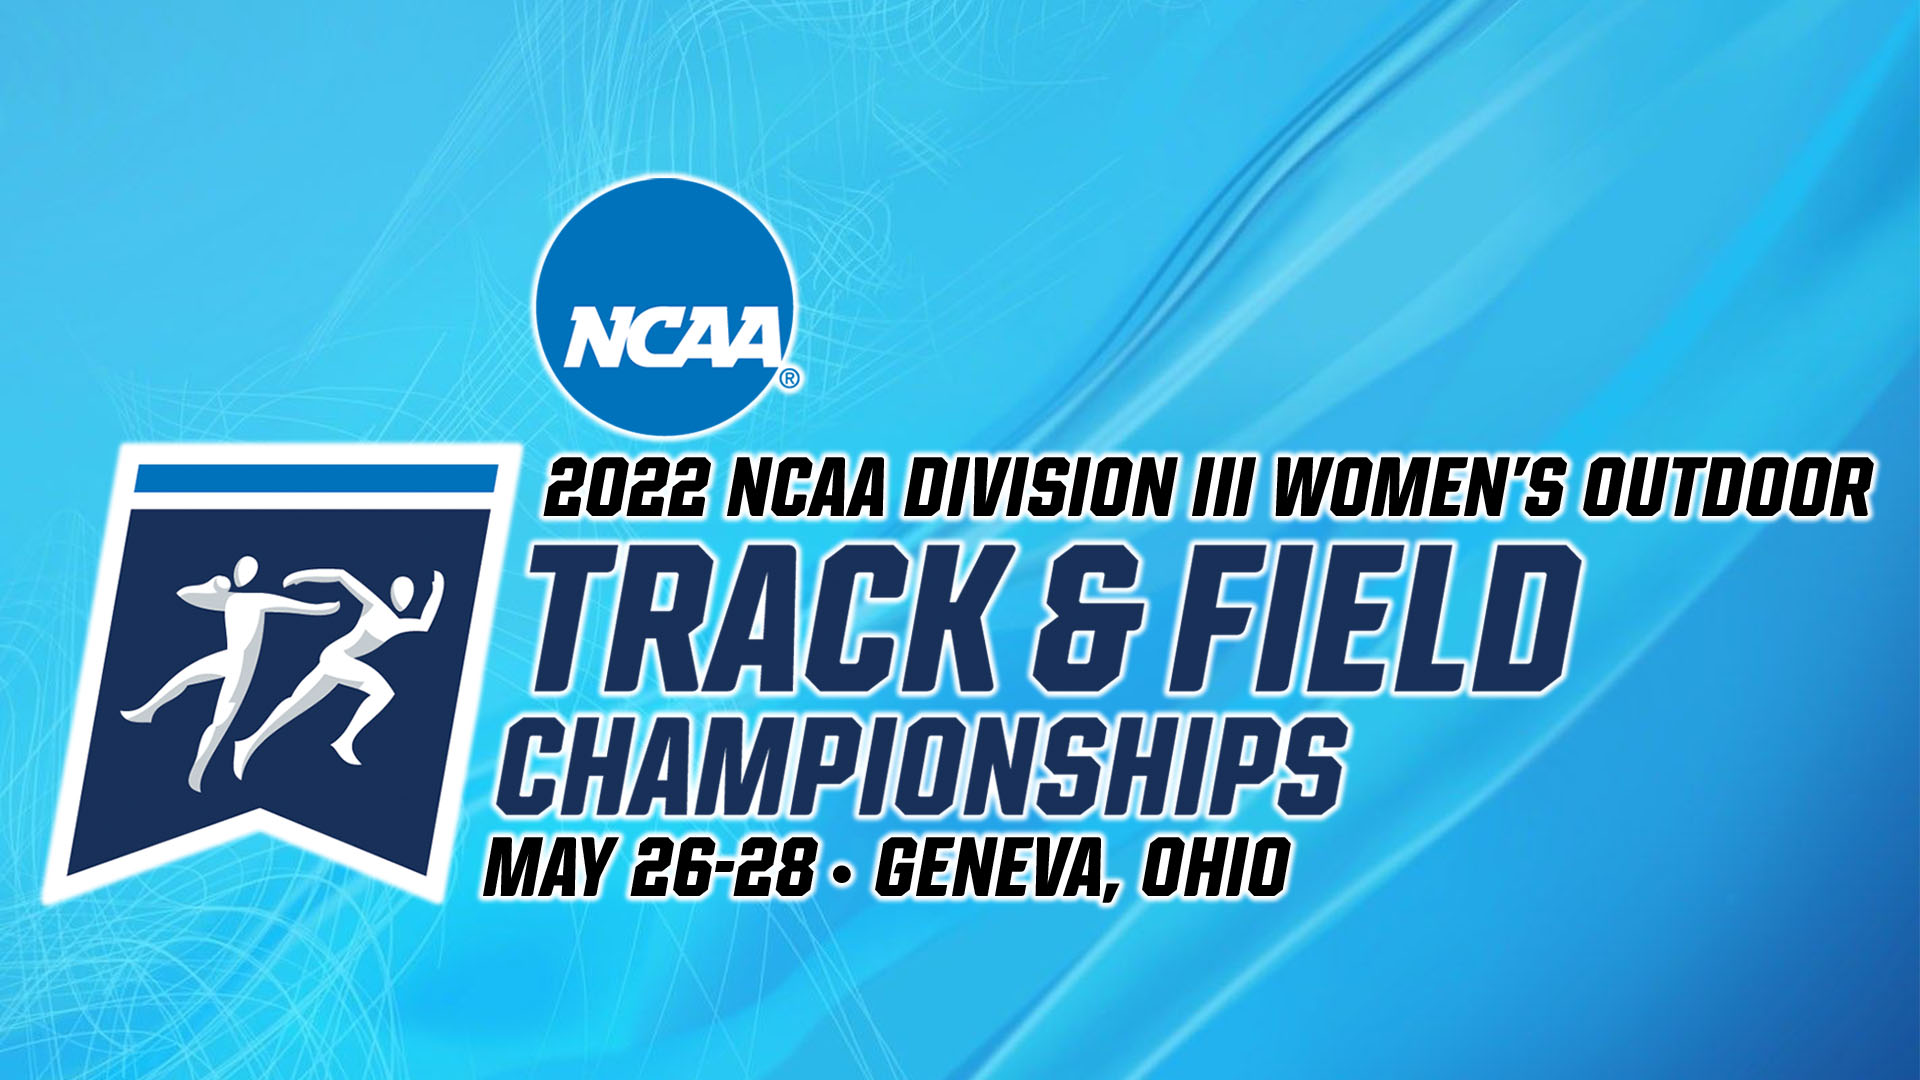 Three Titans To Compete At NCAA Women's Track & Field Championships